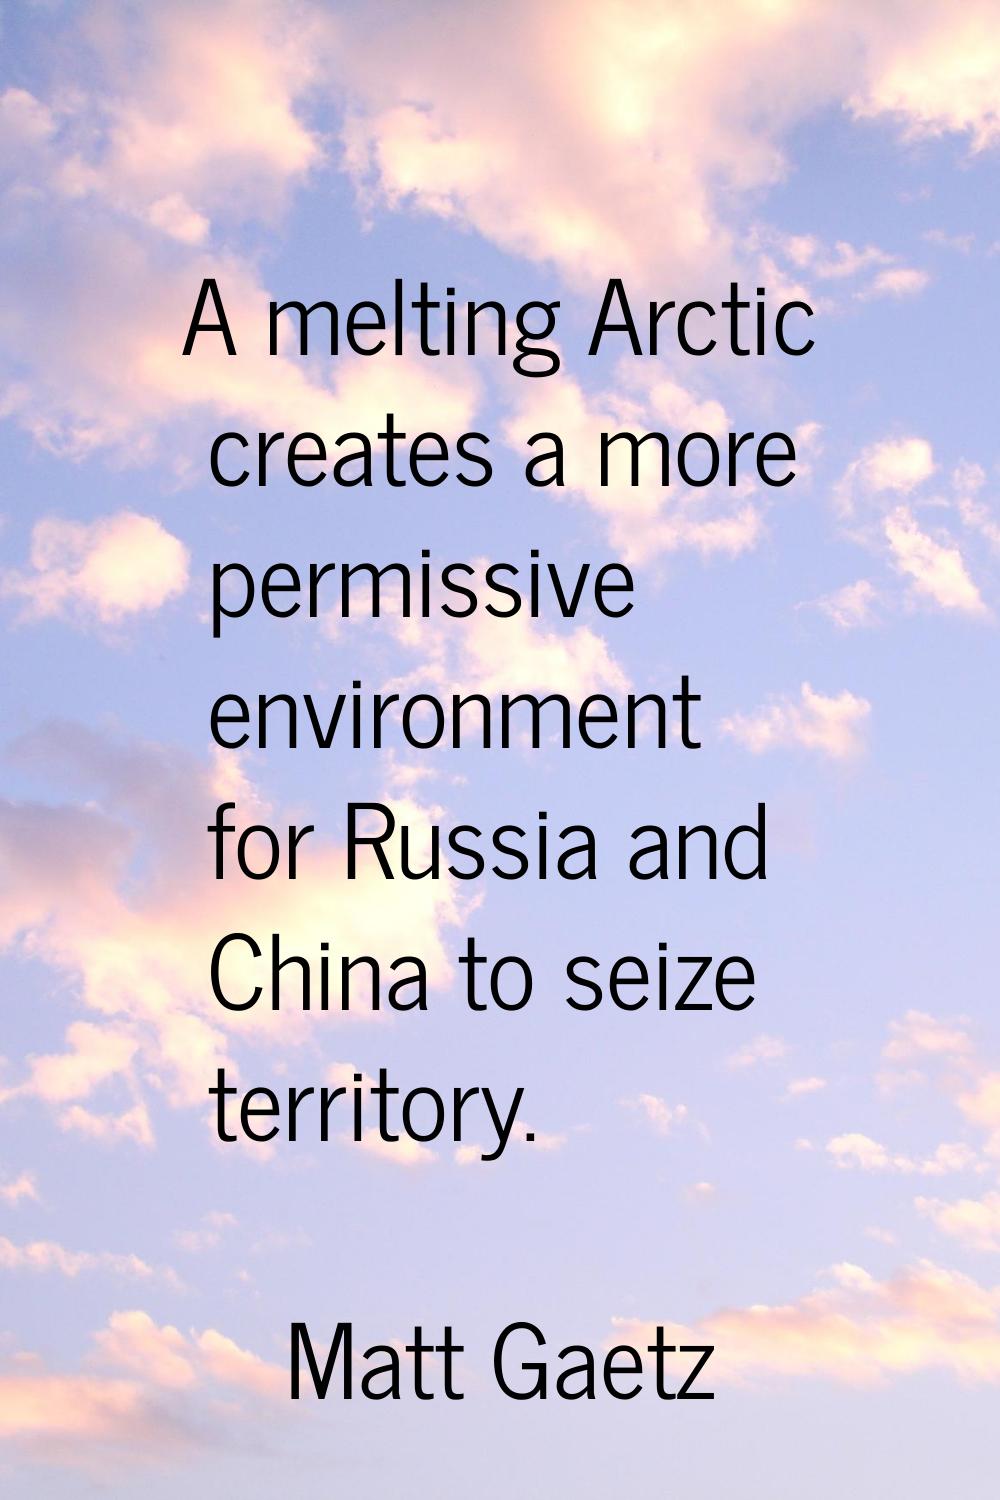 A melting Arctic creates a more permissive environment for Russia and China to seize territory.